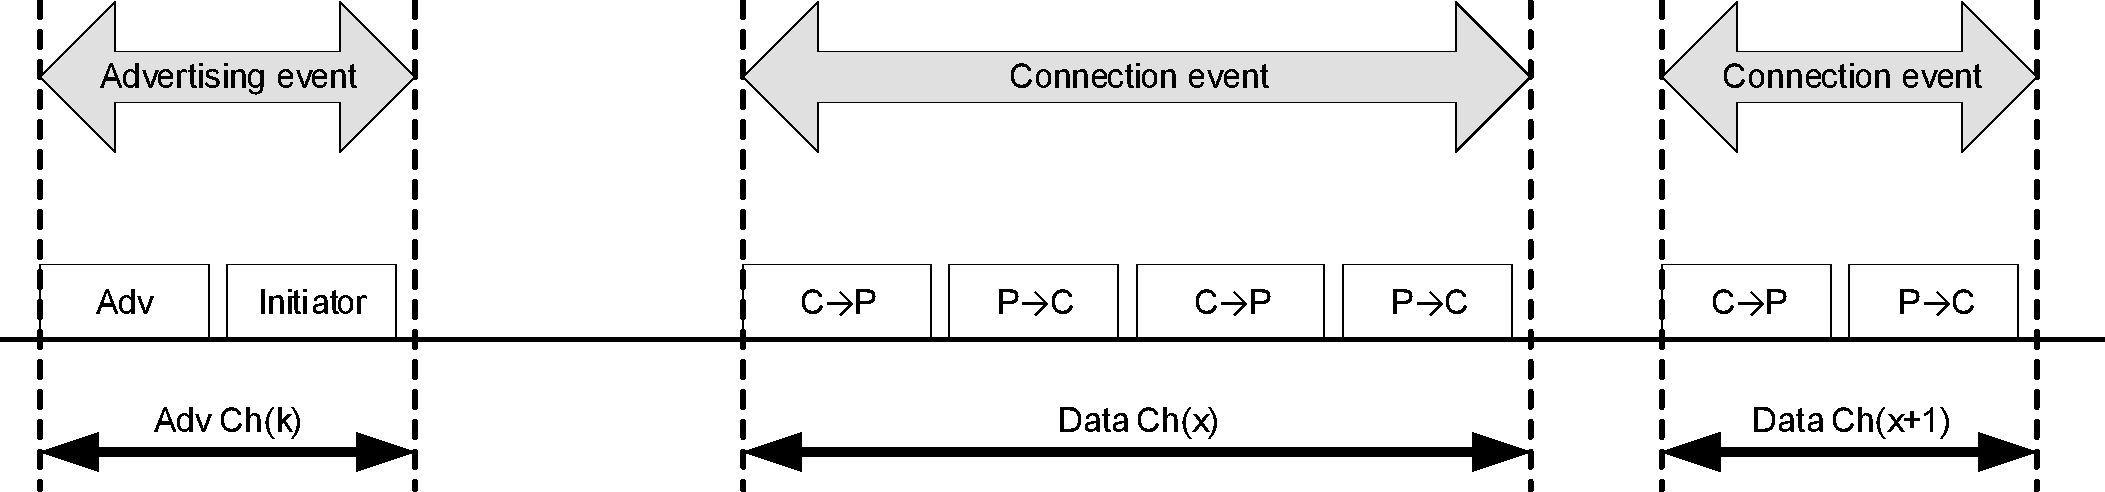 Connection events